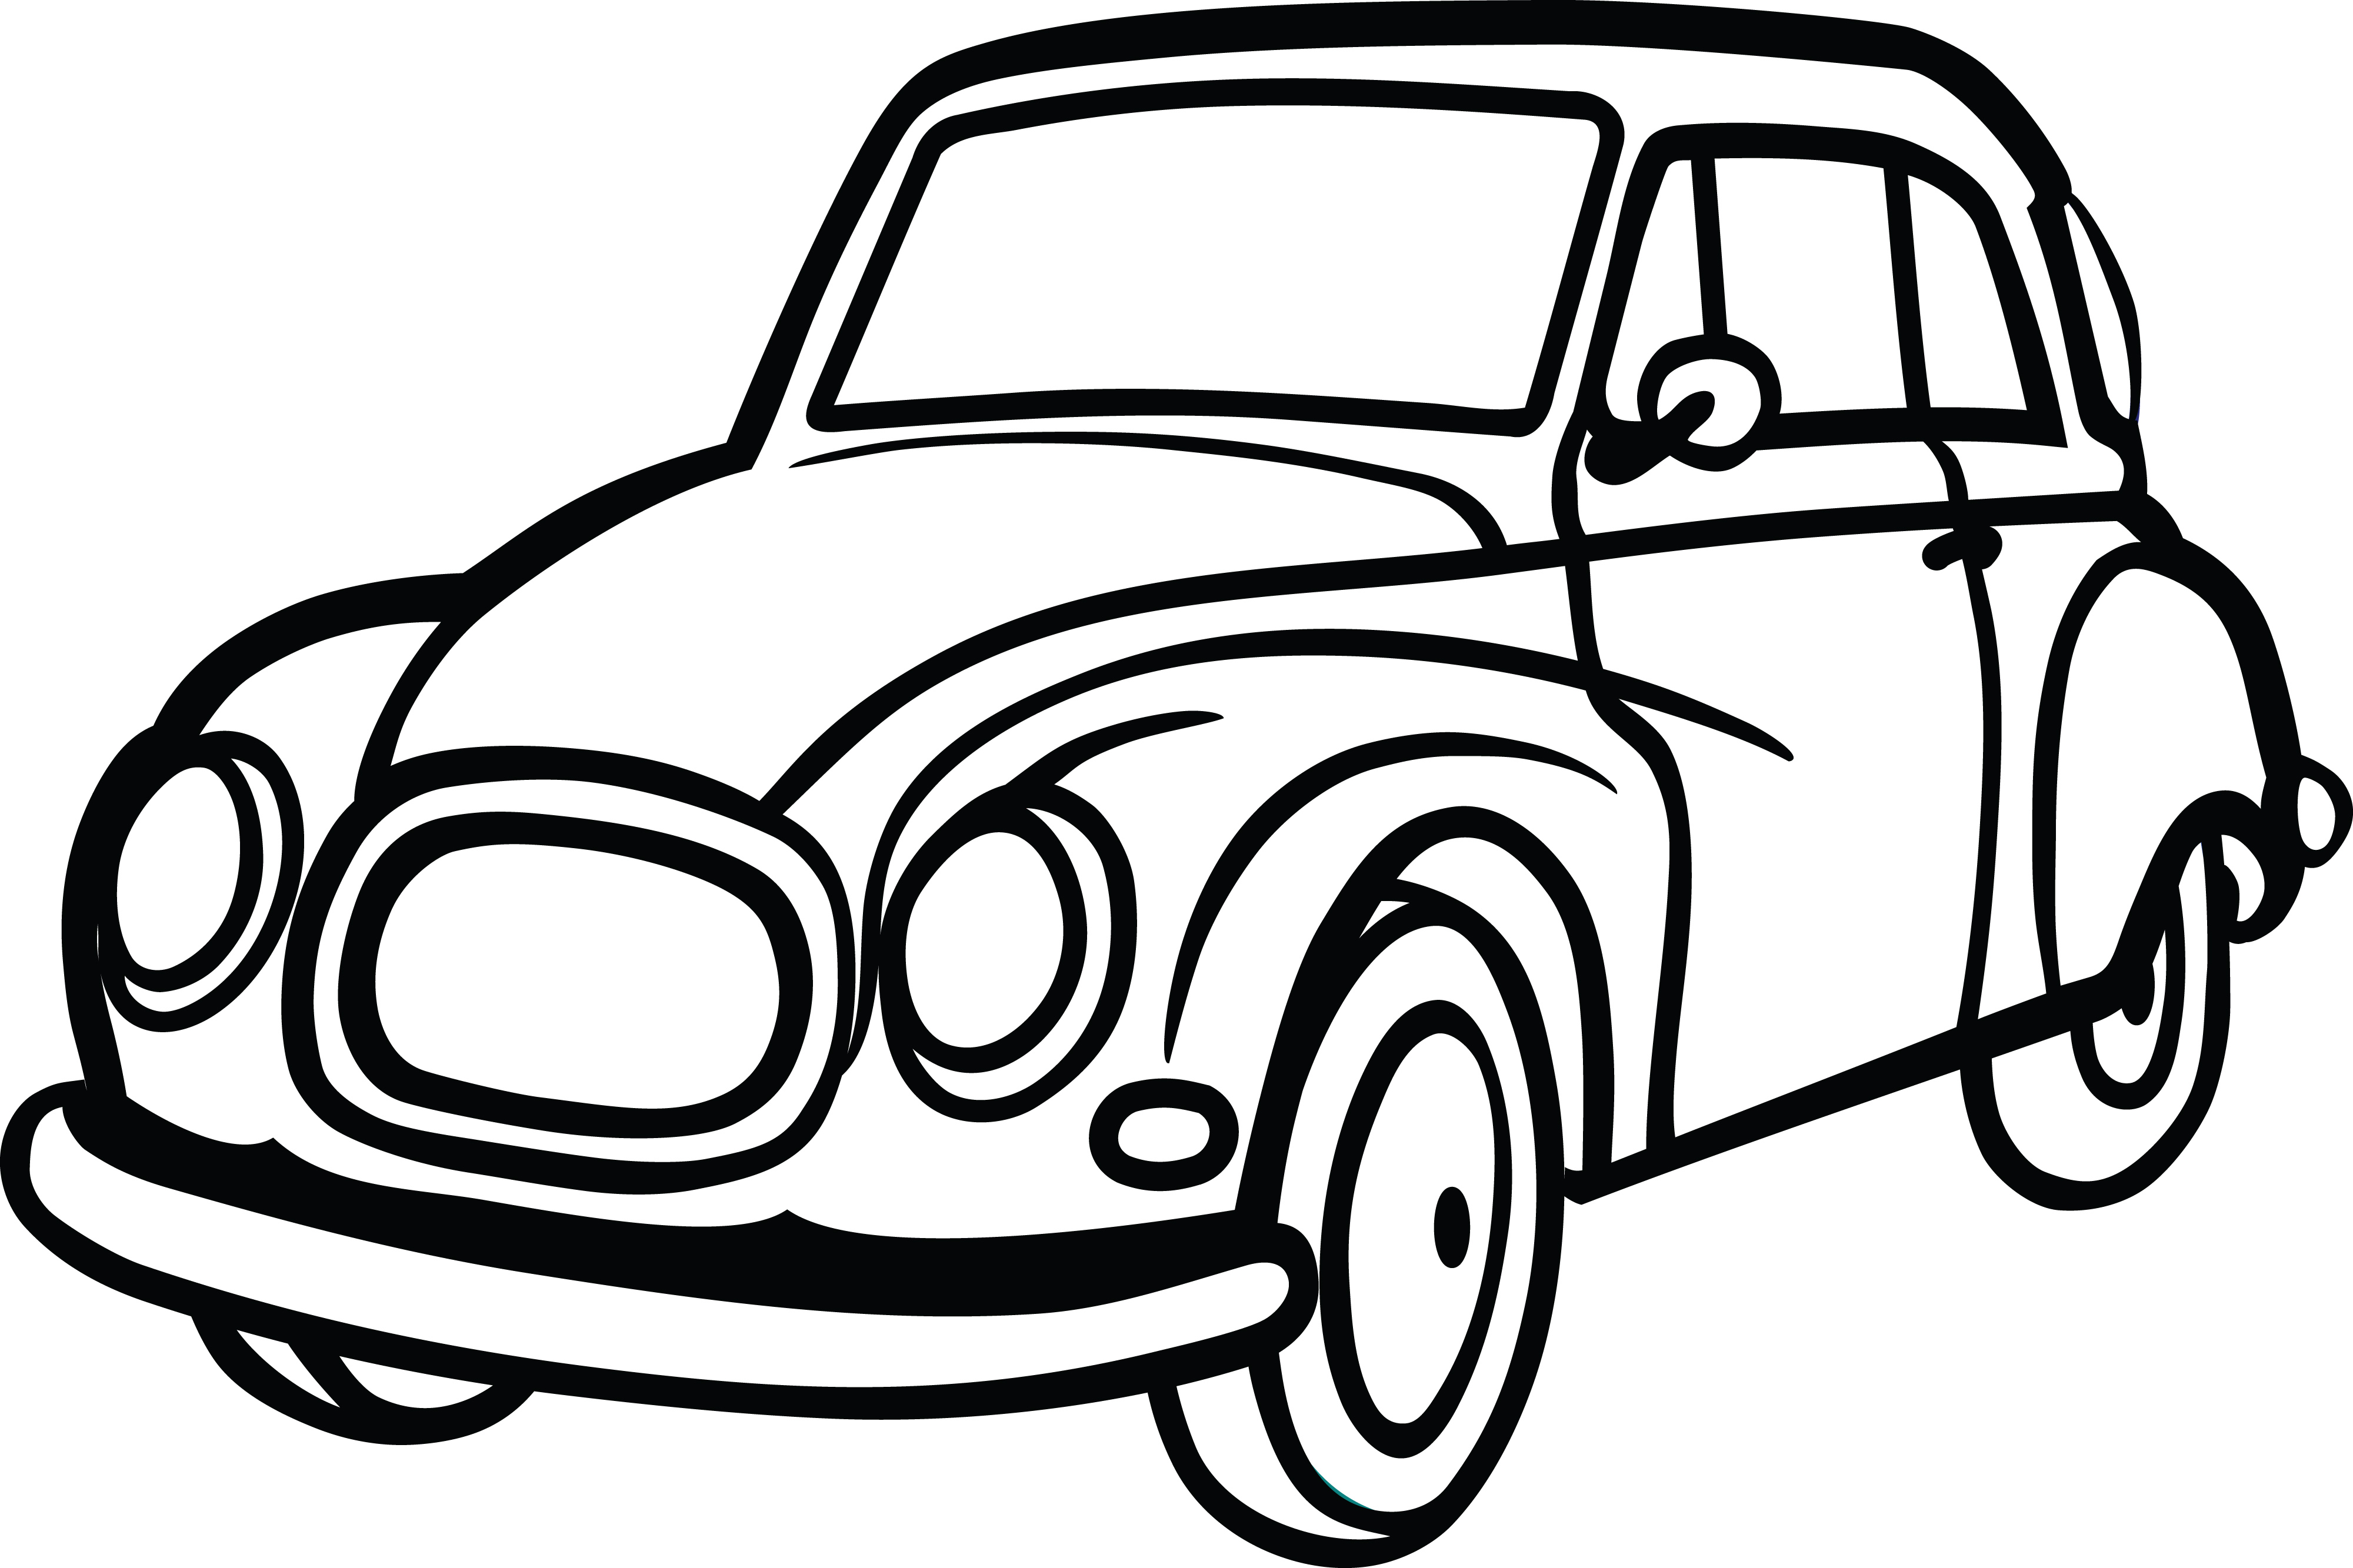 free clipart of a car - photo #25